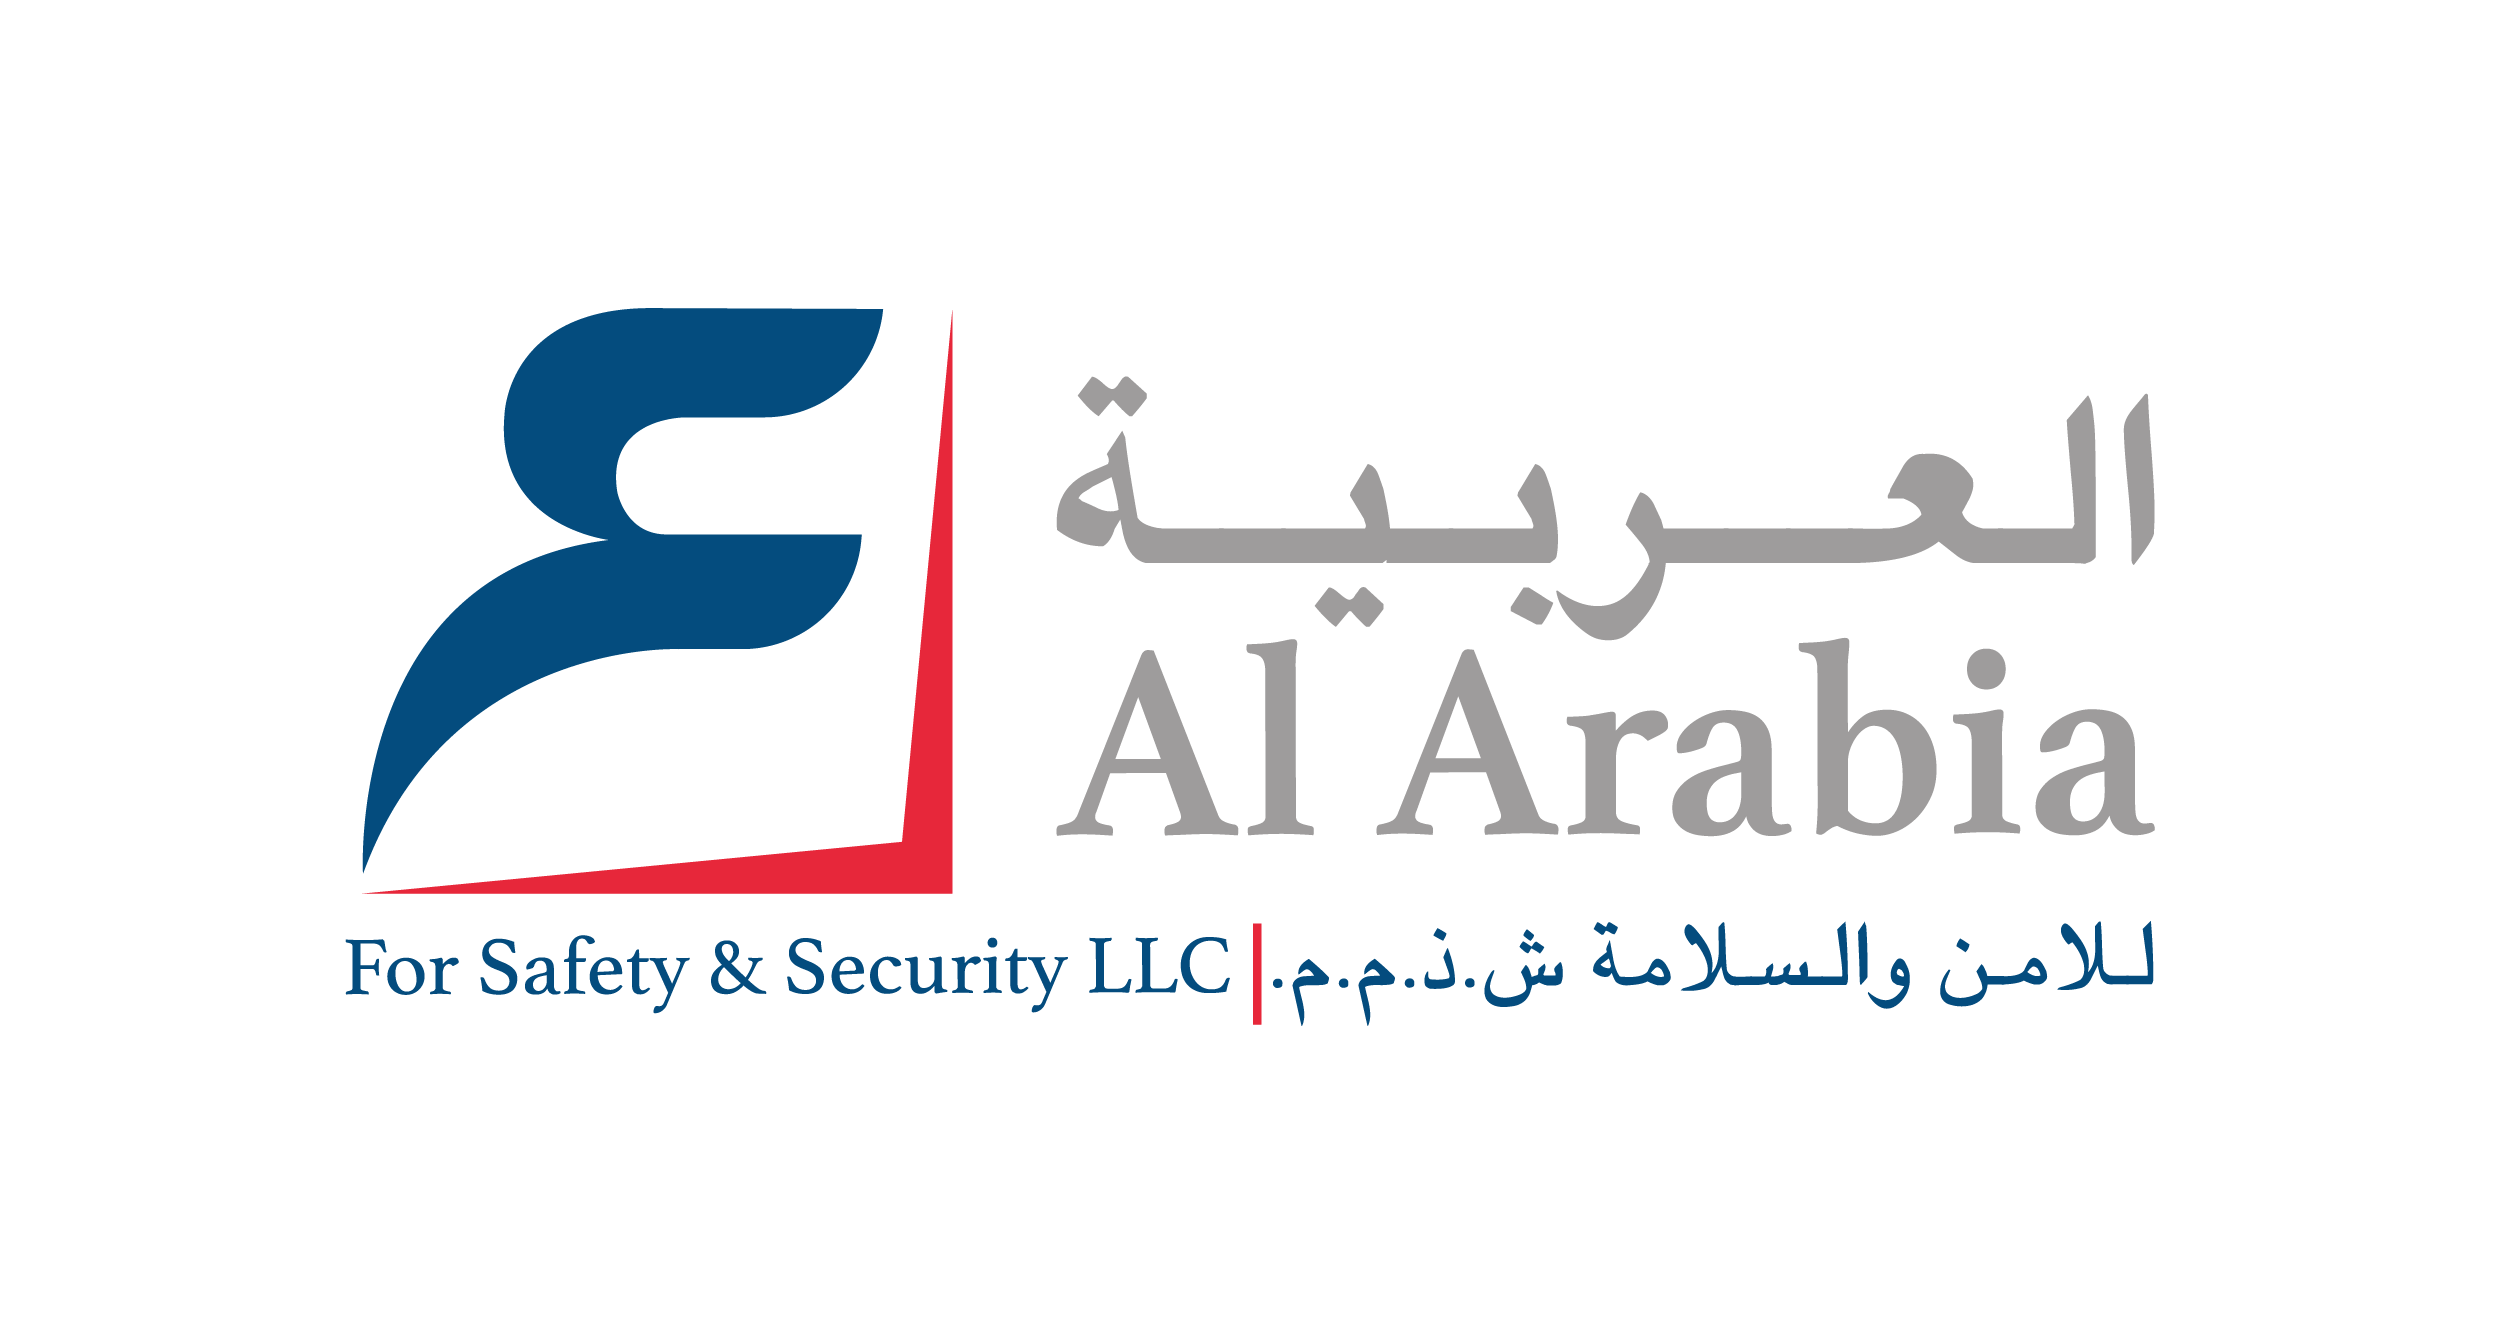 Al Arabia for Safety and Security Solutions UAE